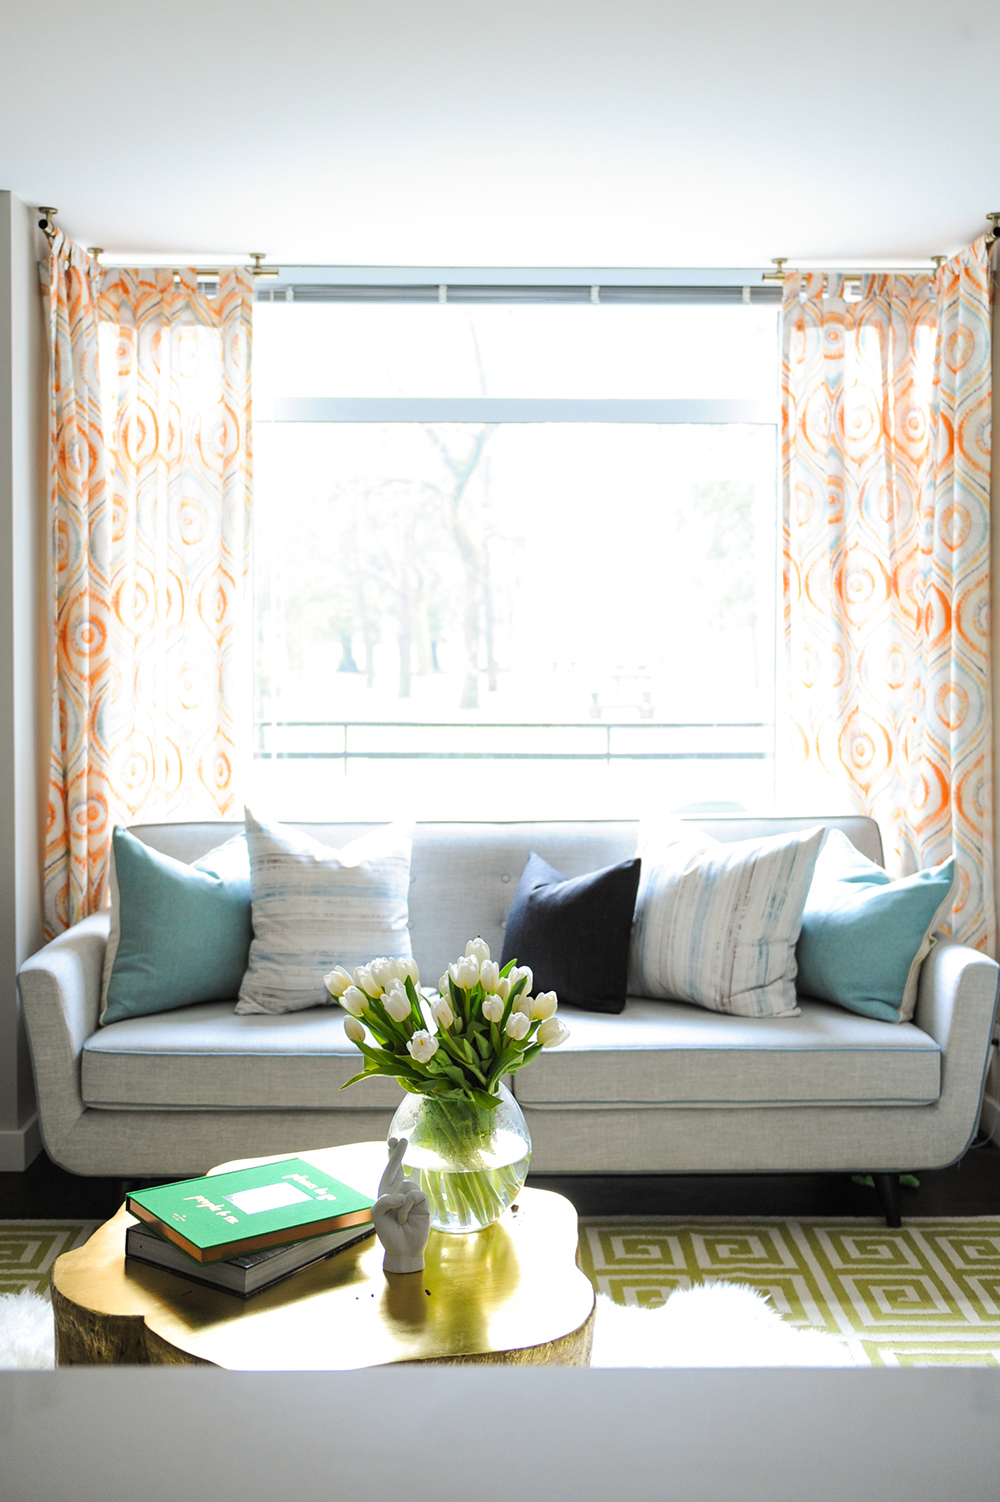 A bright and glam living space with bold hits of pattern.